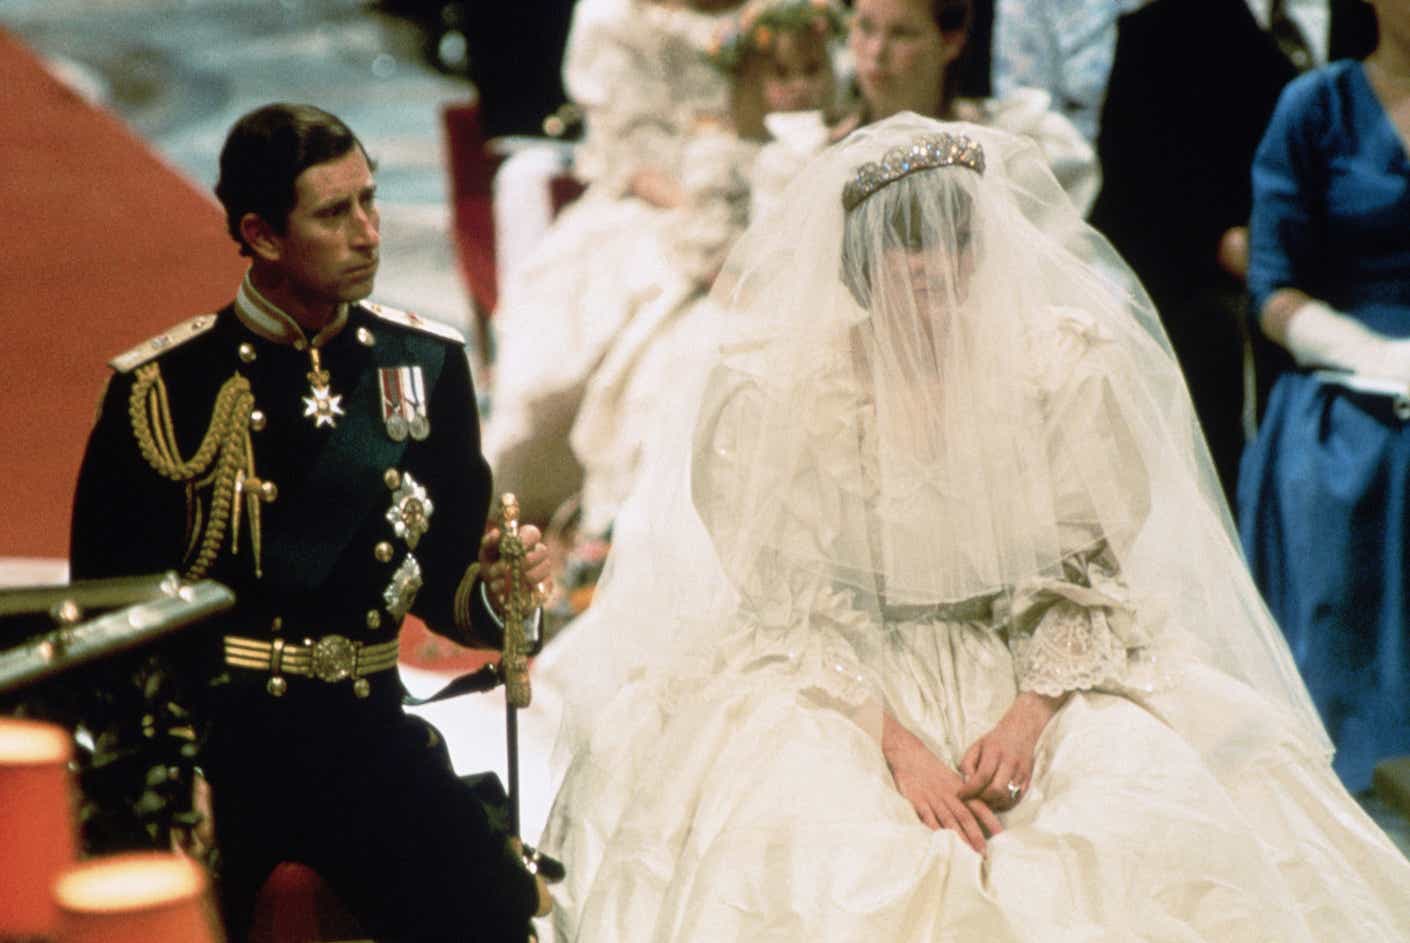 Wedding of Prince Charles and Lady Diana